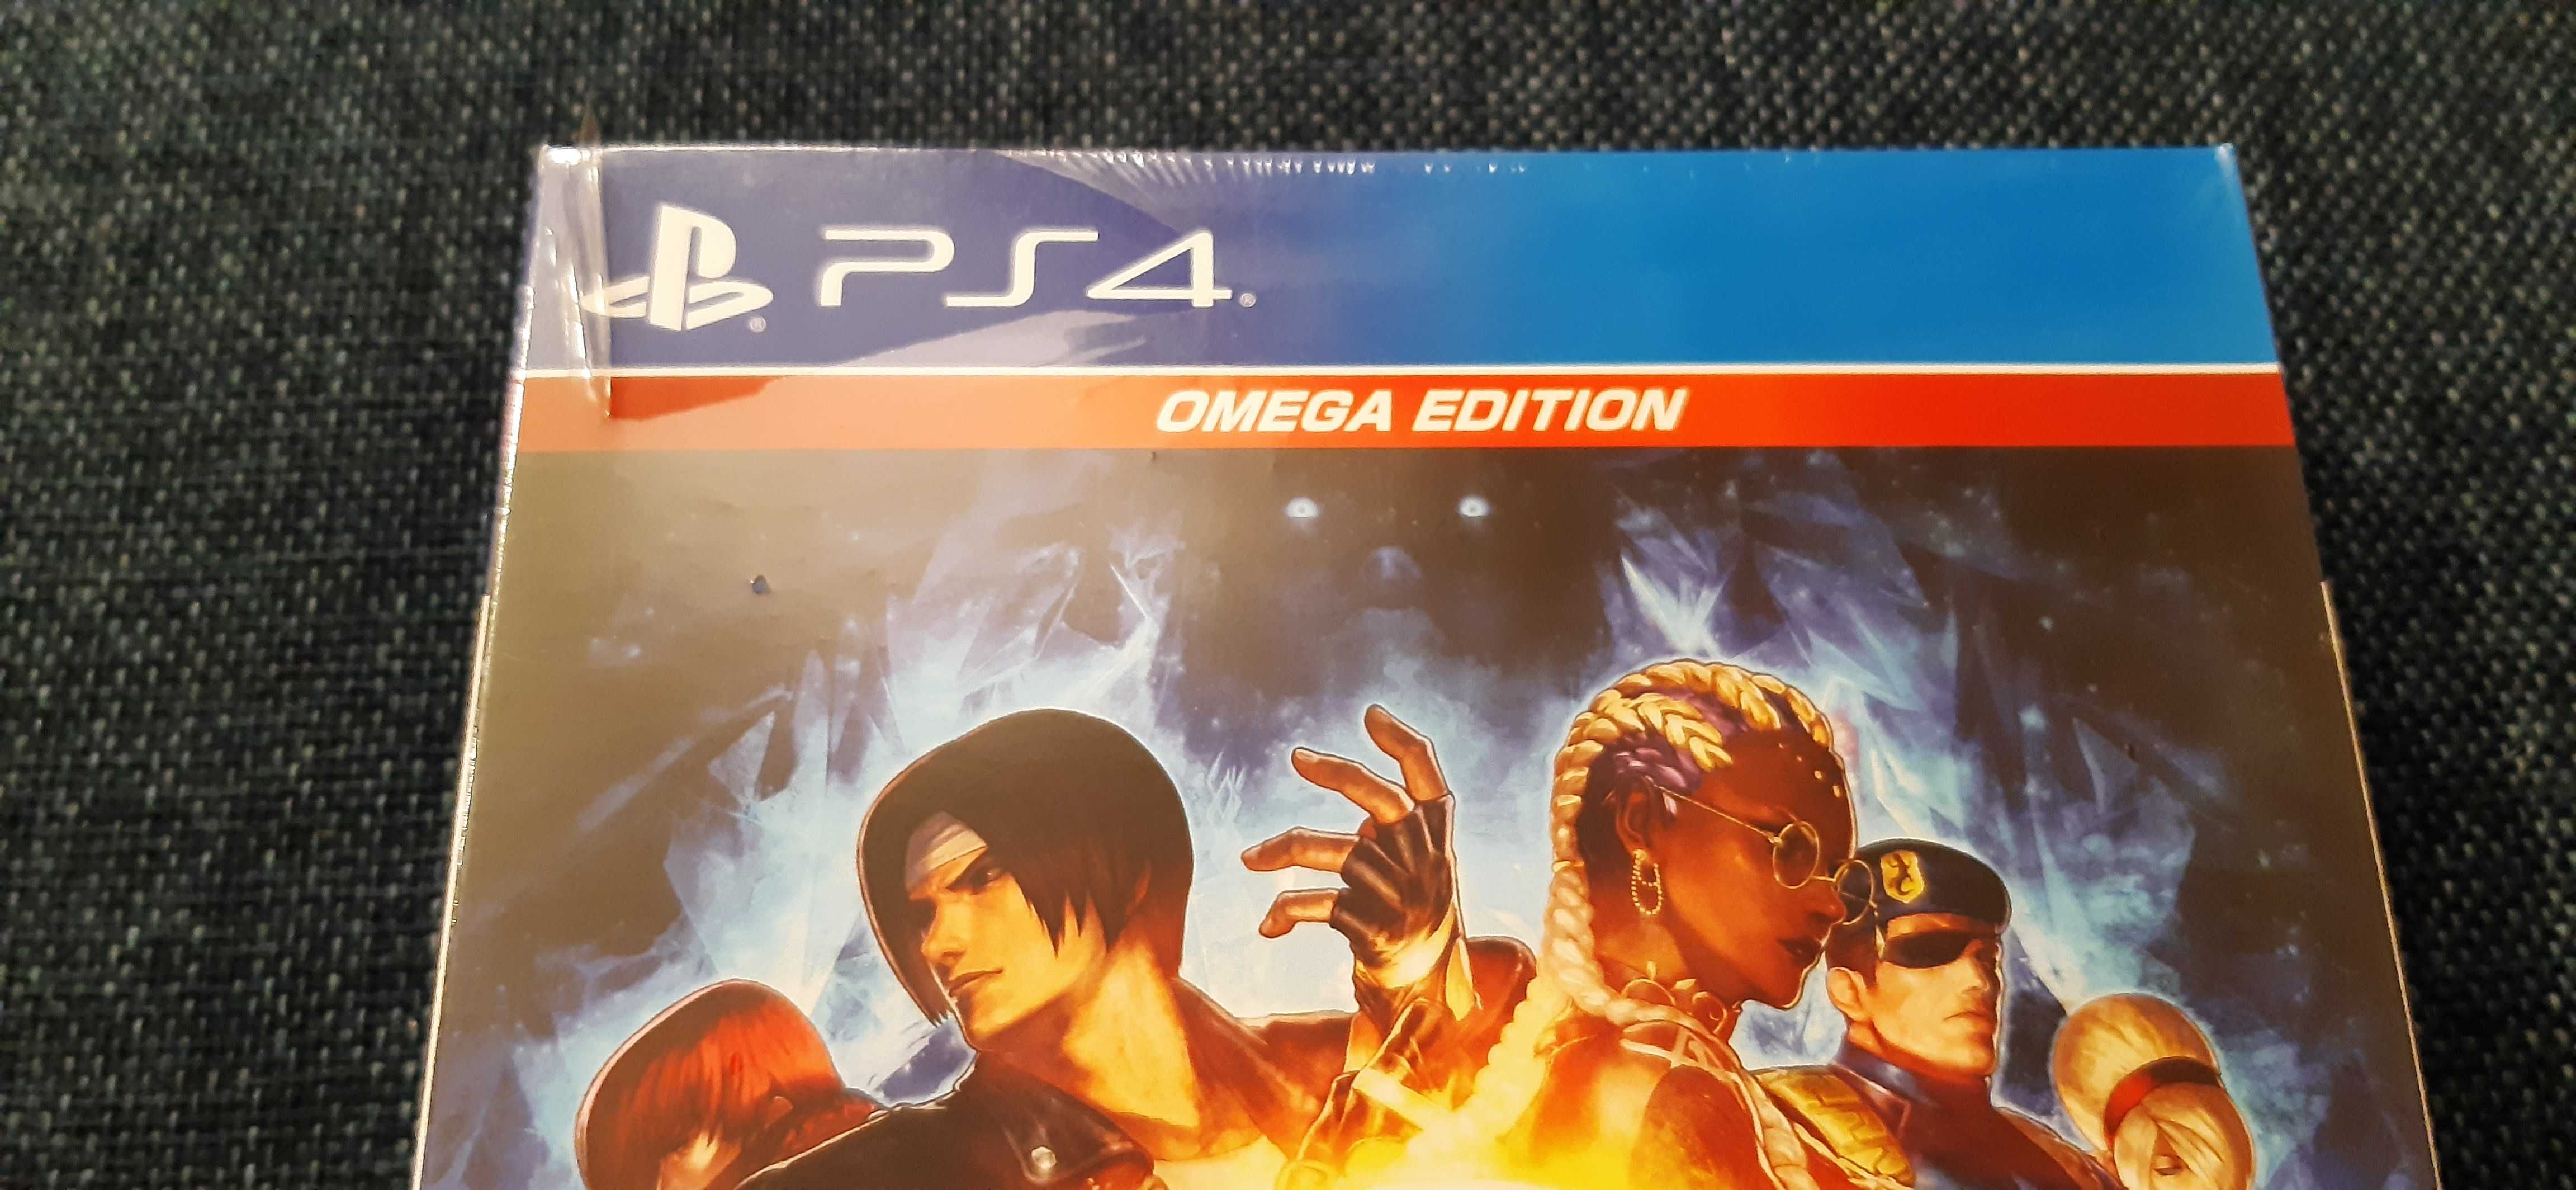 PS4 The King of Fighters XV Omega Edition , nowa folia